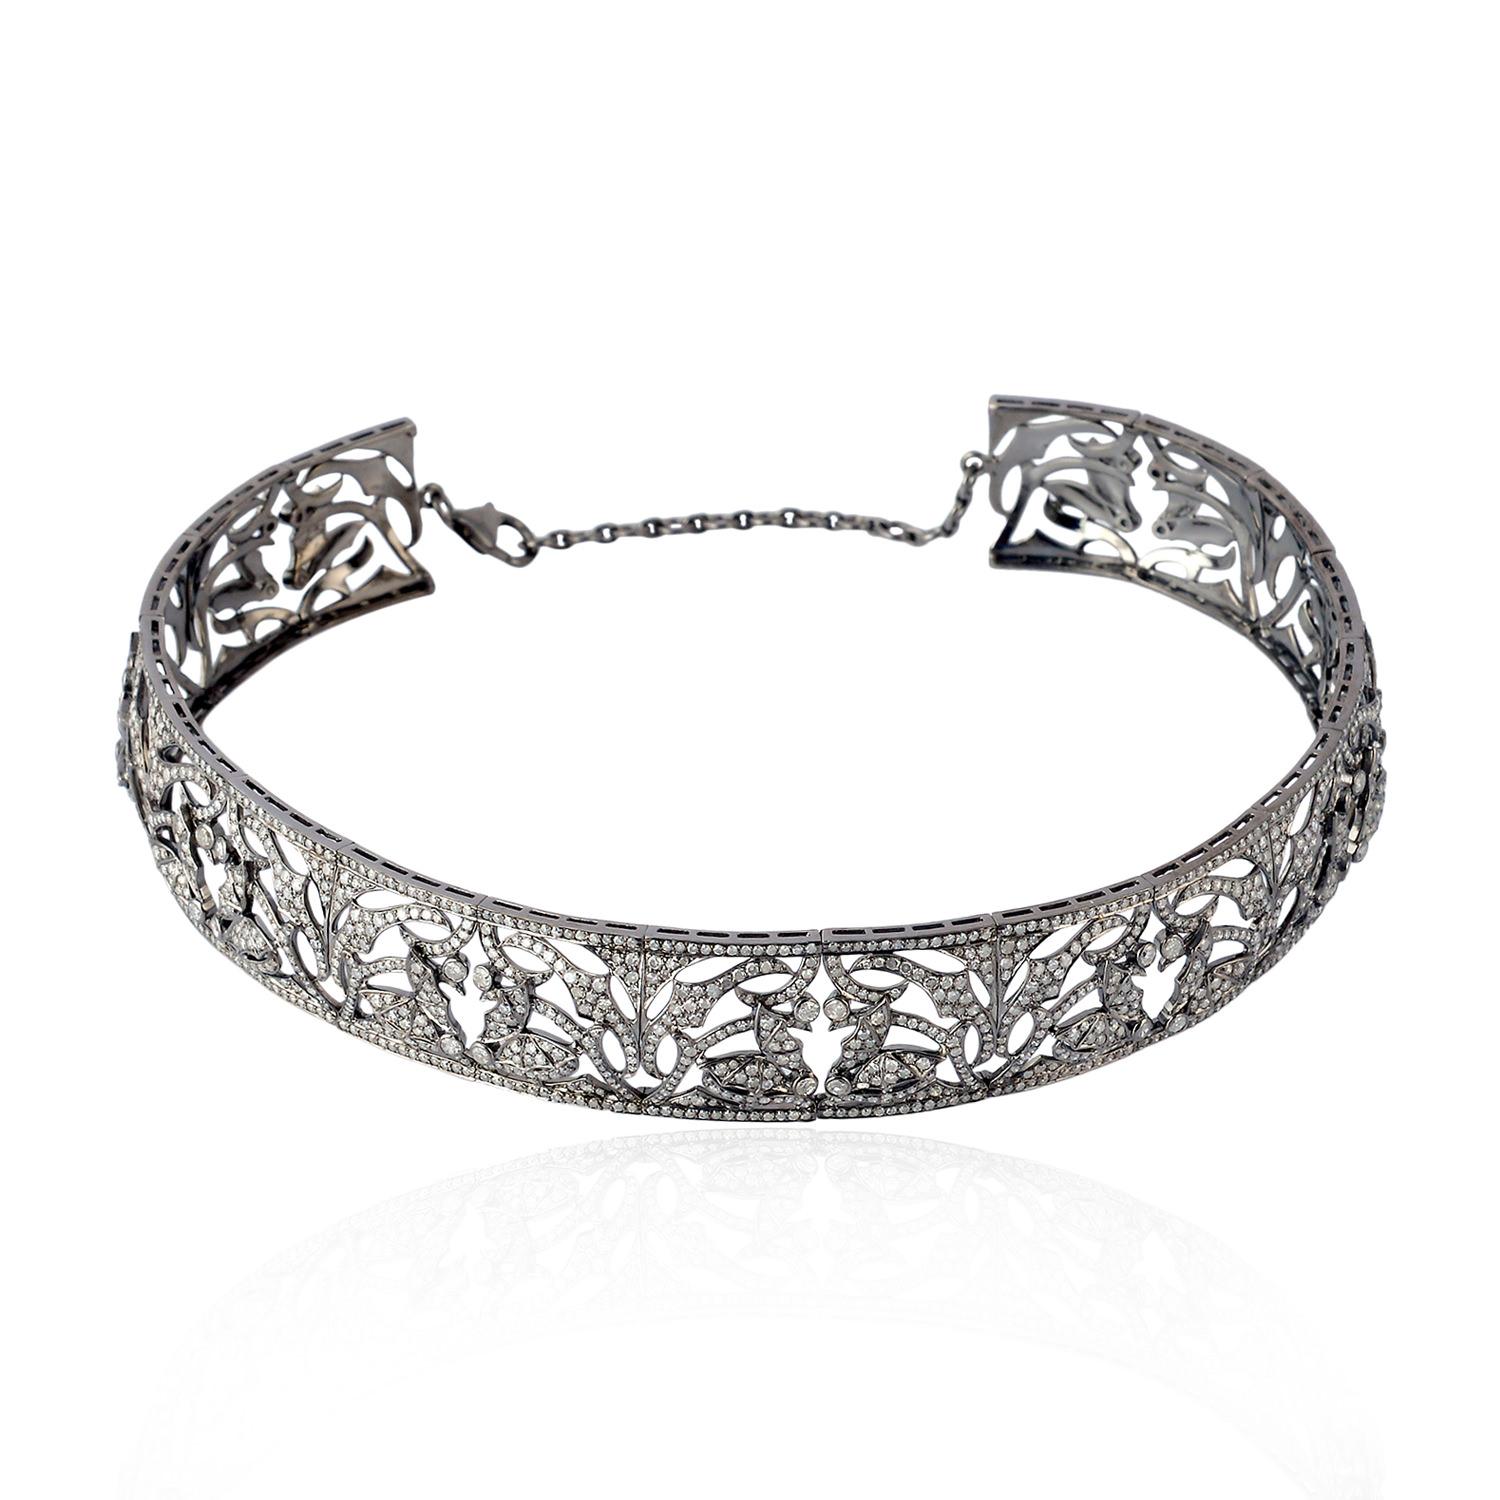 Art Nouveau Flower Pattern Pave Diamond Choker Necklace Made in 18k White Gold & Silver For Sale